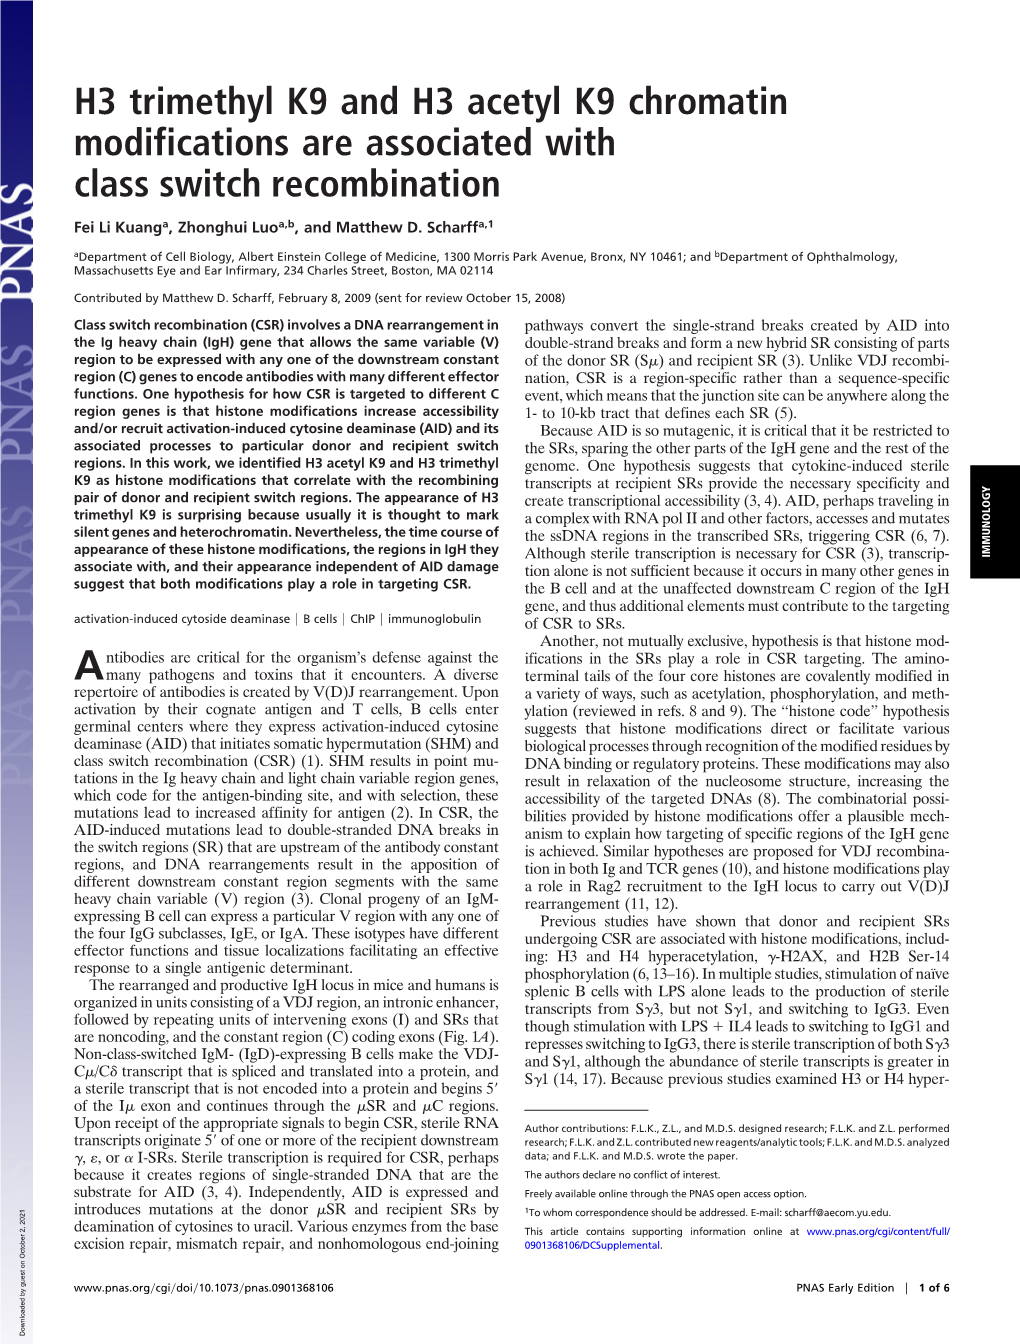 H3 Trimethyl K9 and H3 Acetyl K9 Chromatin Modifications Are Associated with Class Switch Recombination